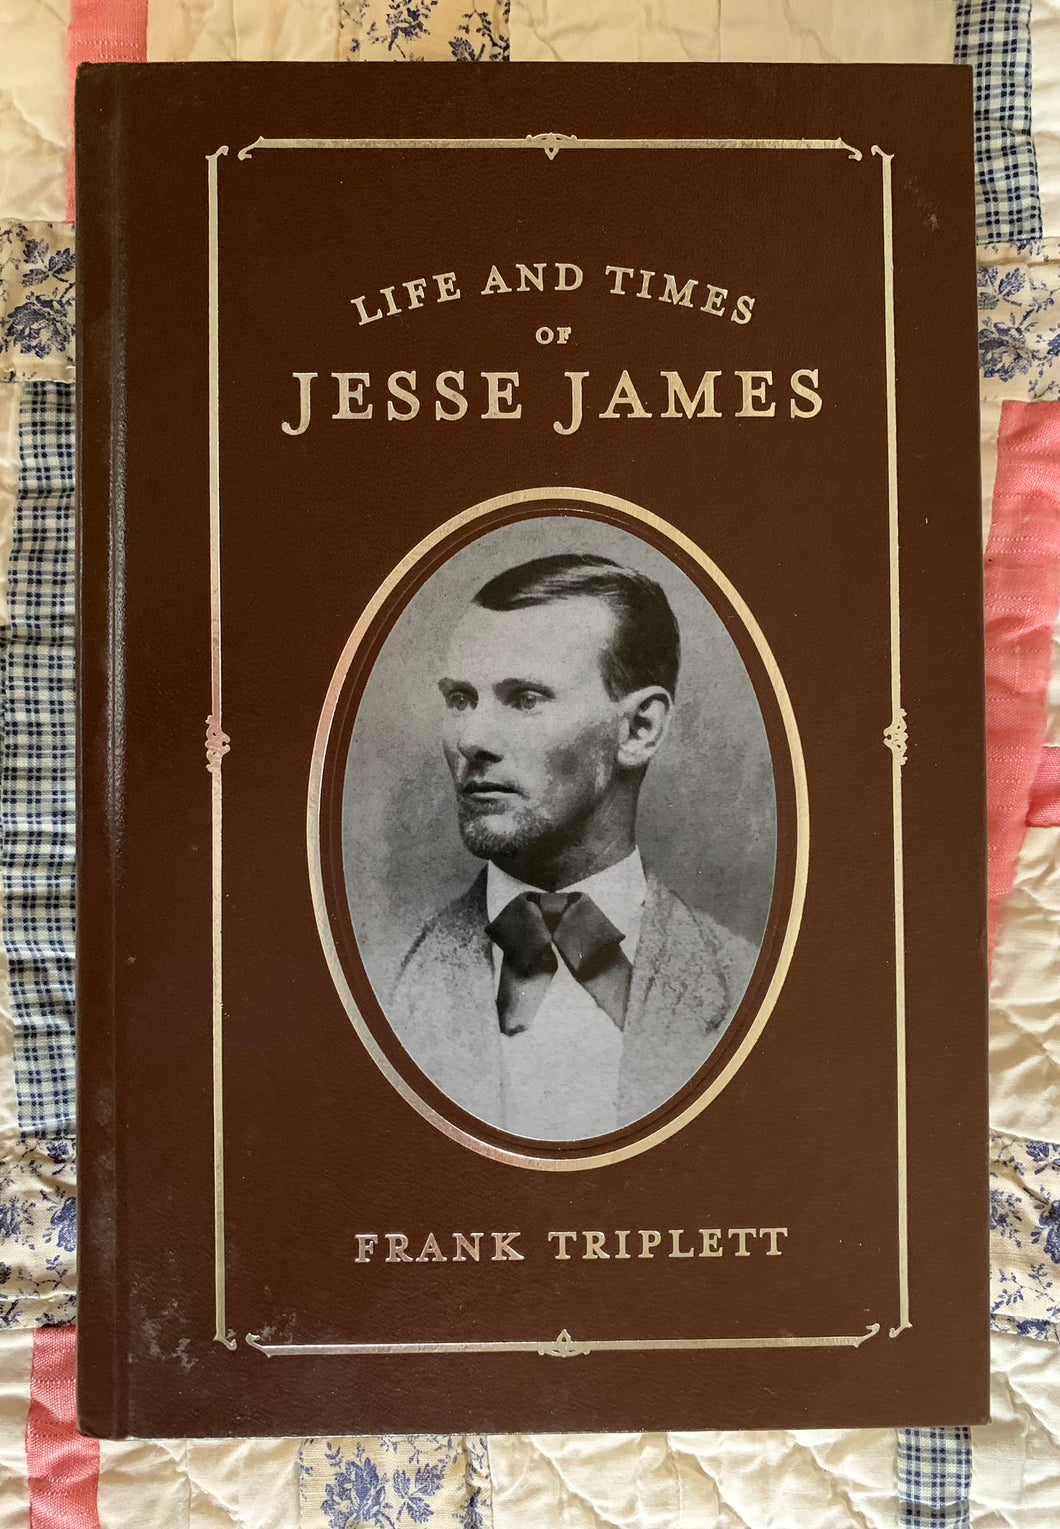 Life and Times of Jesse James